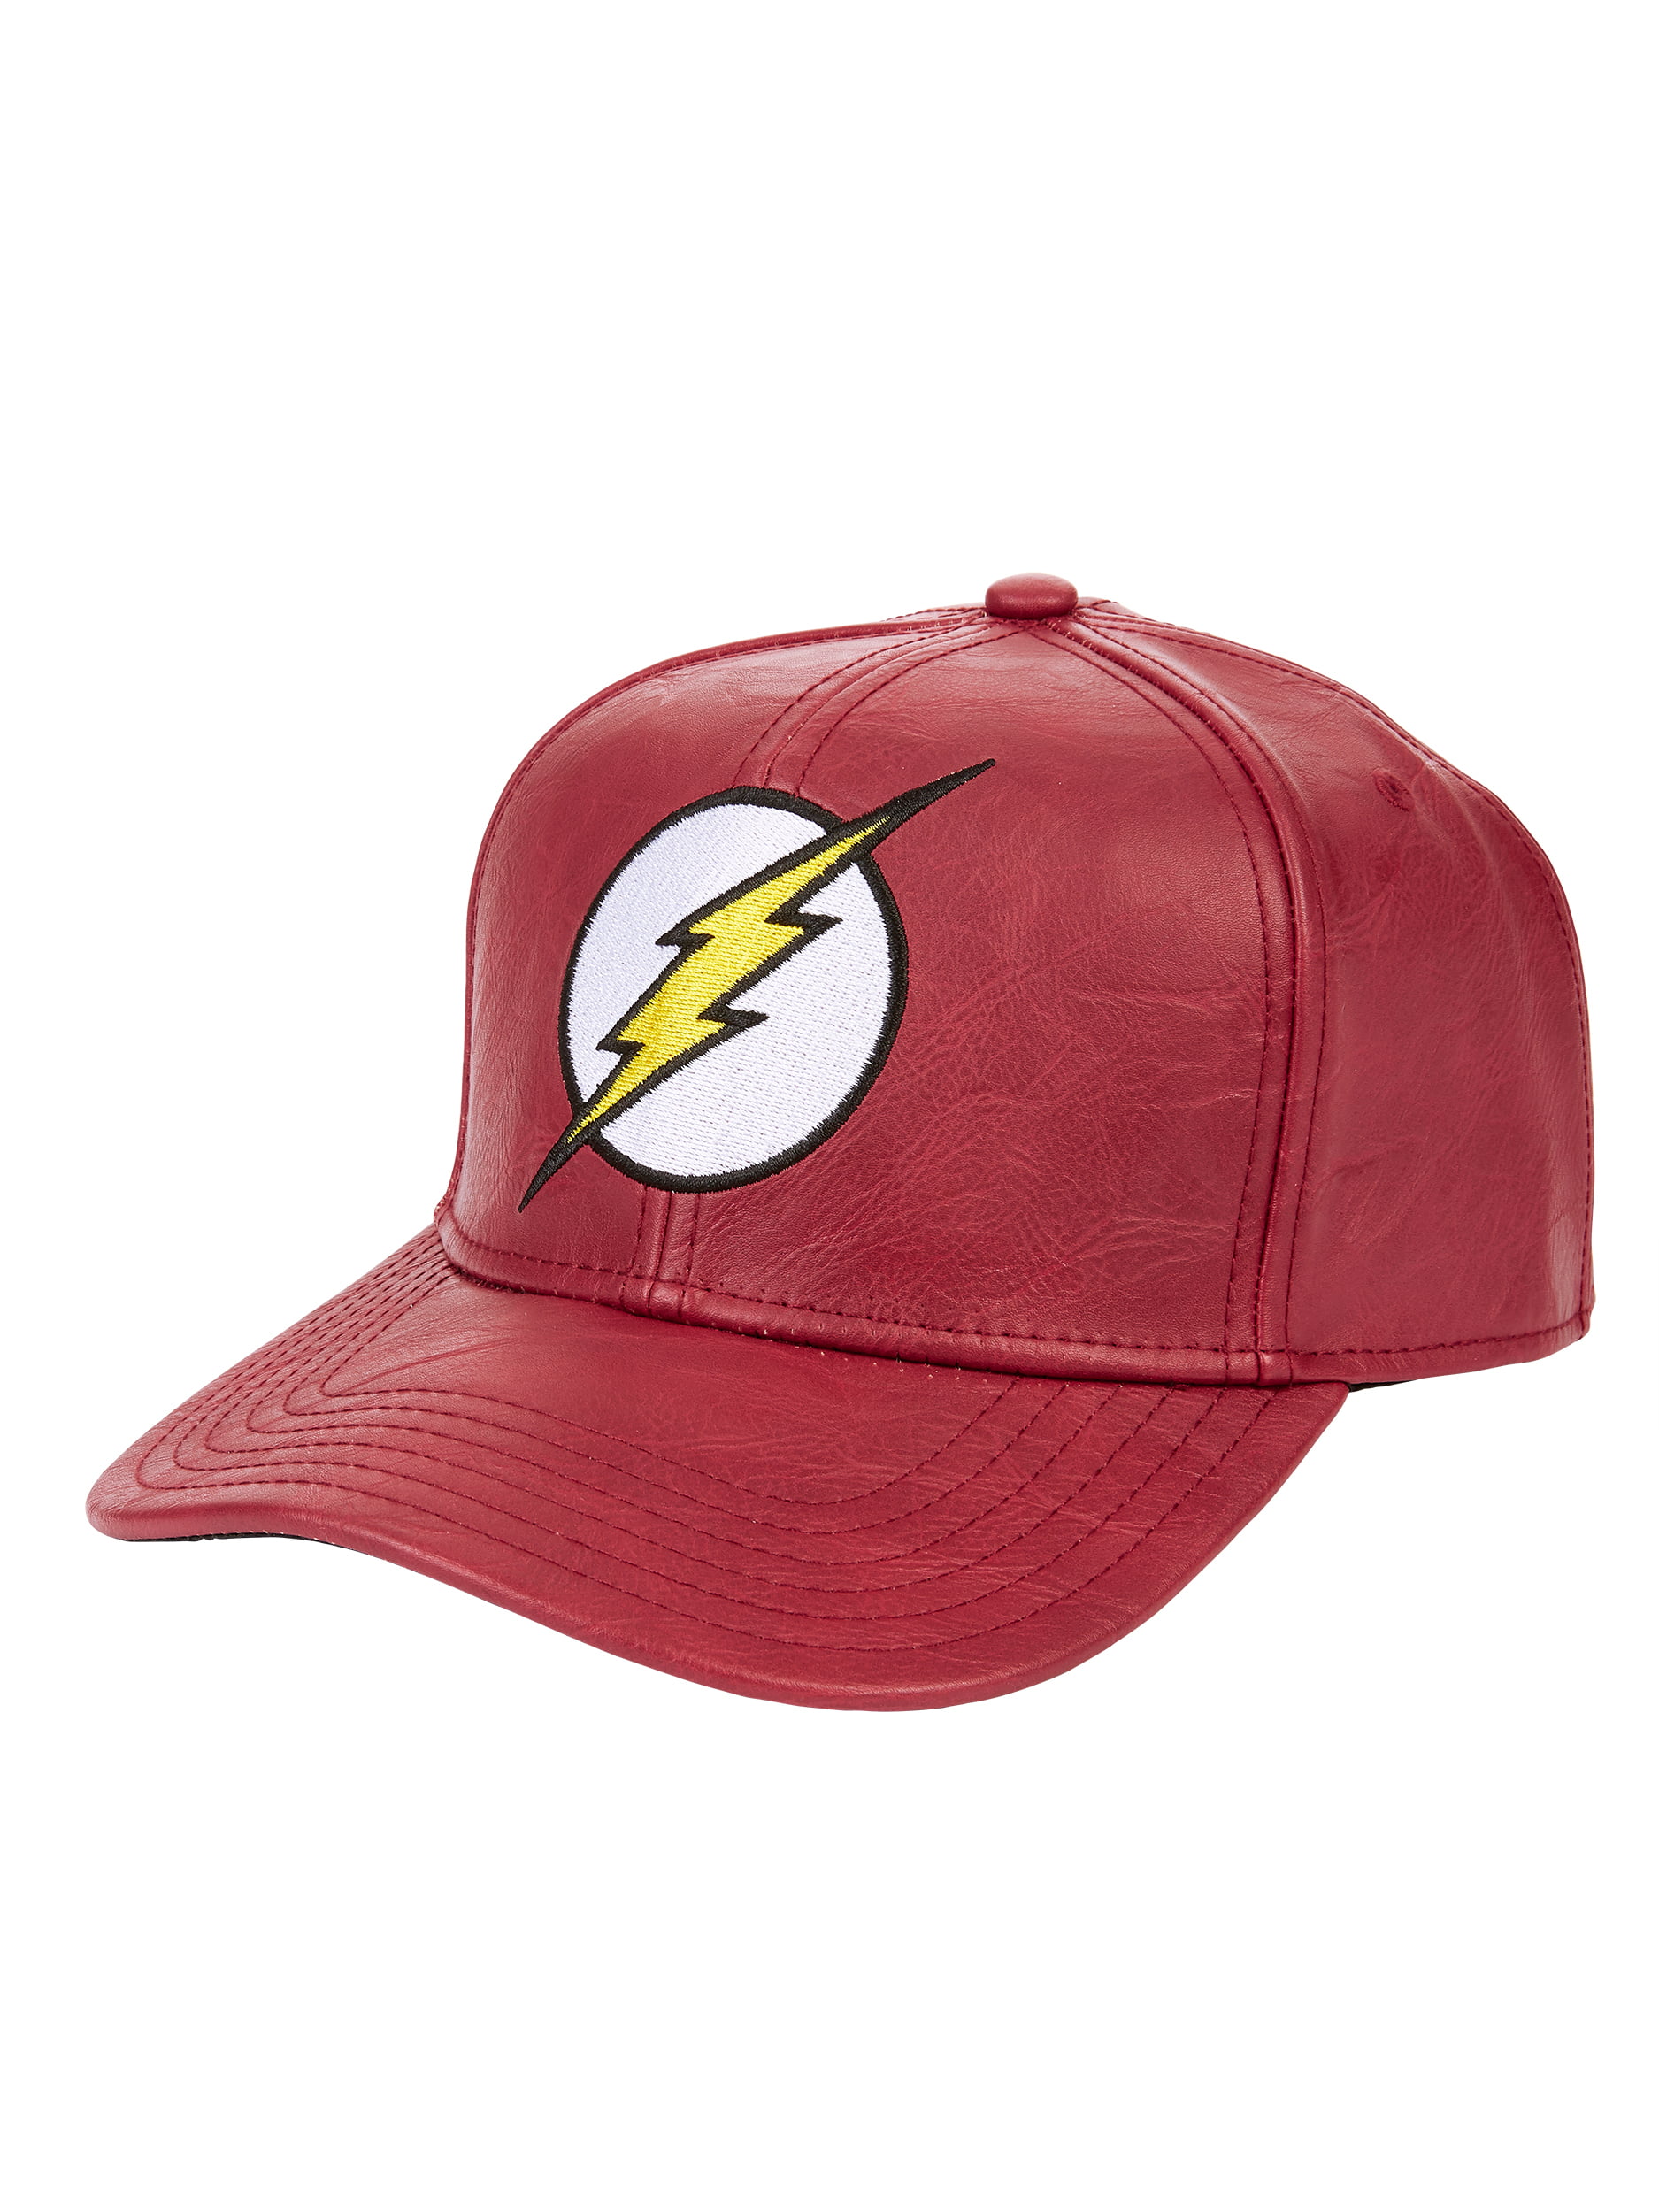 S.T.A.R Labs Inspired Flash Hat Cap